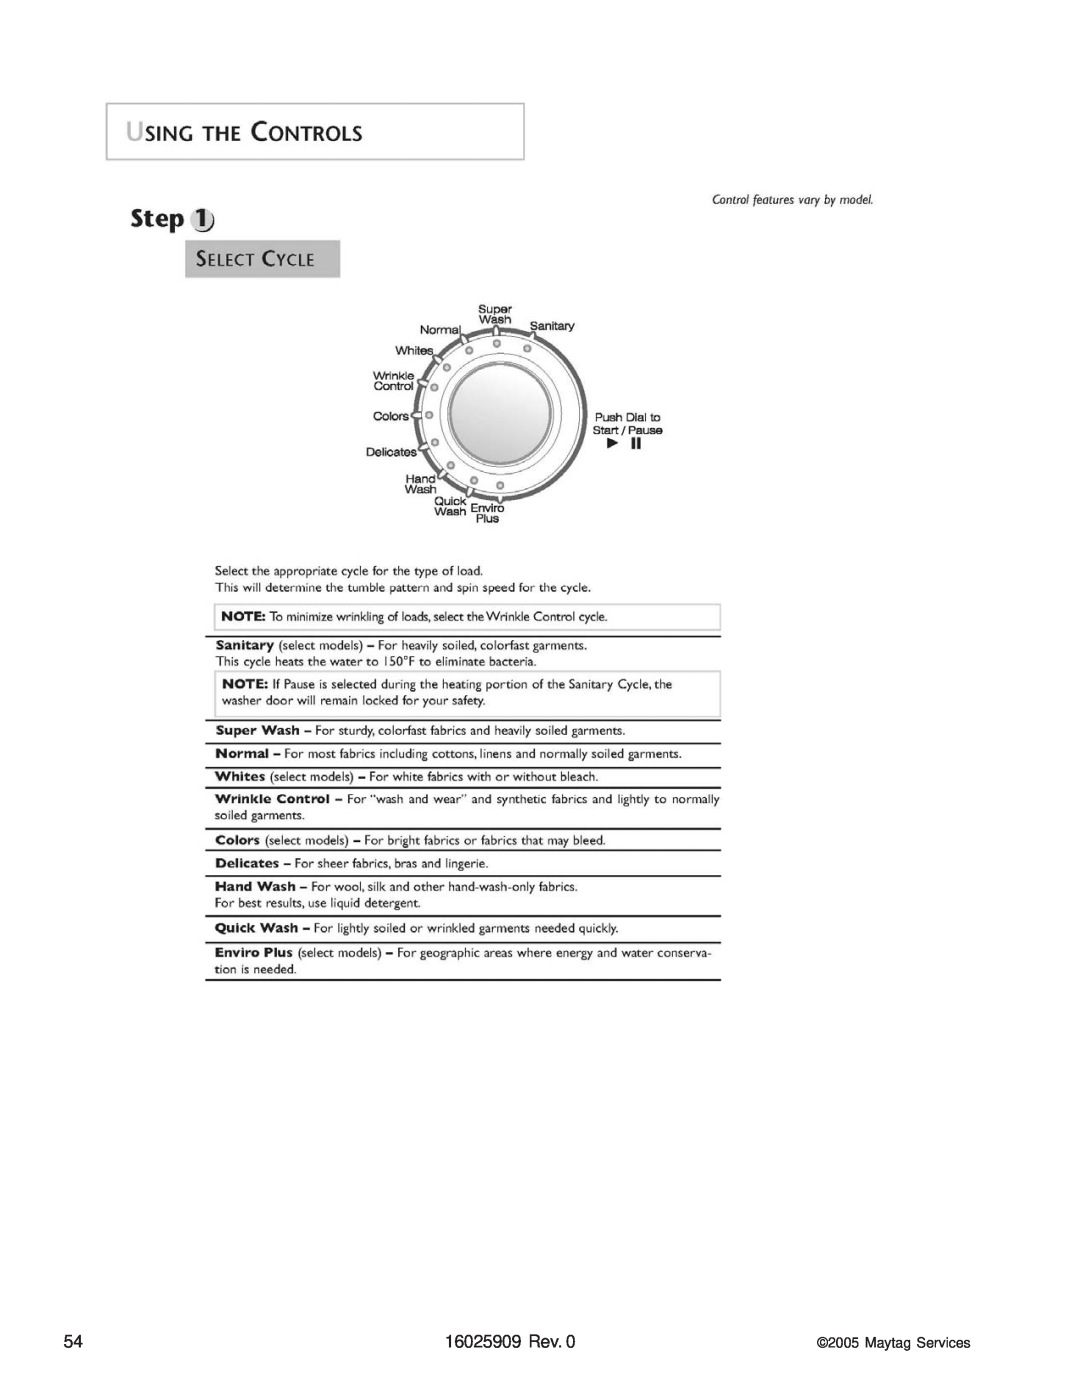 Whirlpool MAH9700AW manual 16025909 Rev, Maytag Services 